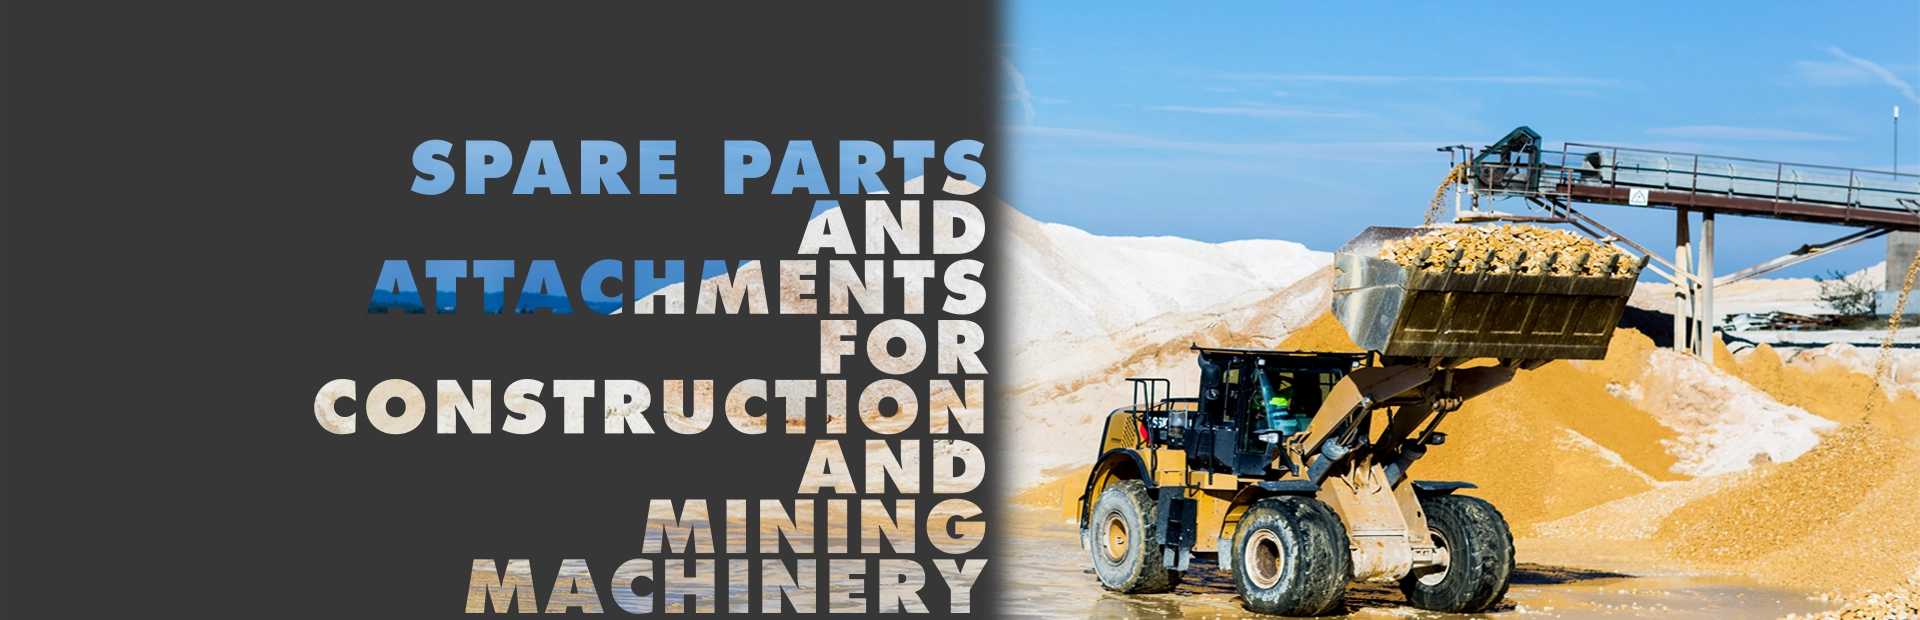 Spare Parts And Attachments for Construction and Mining Machinery